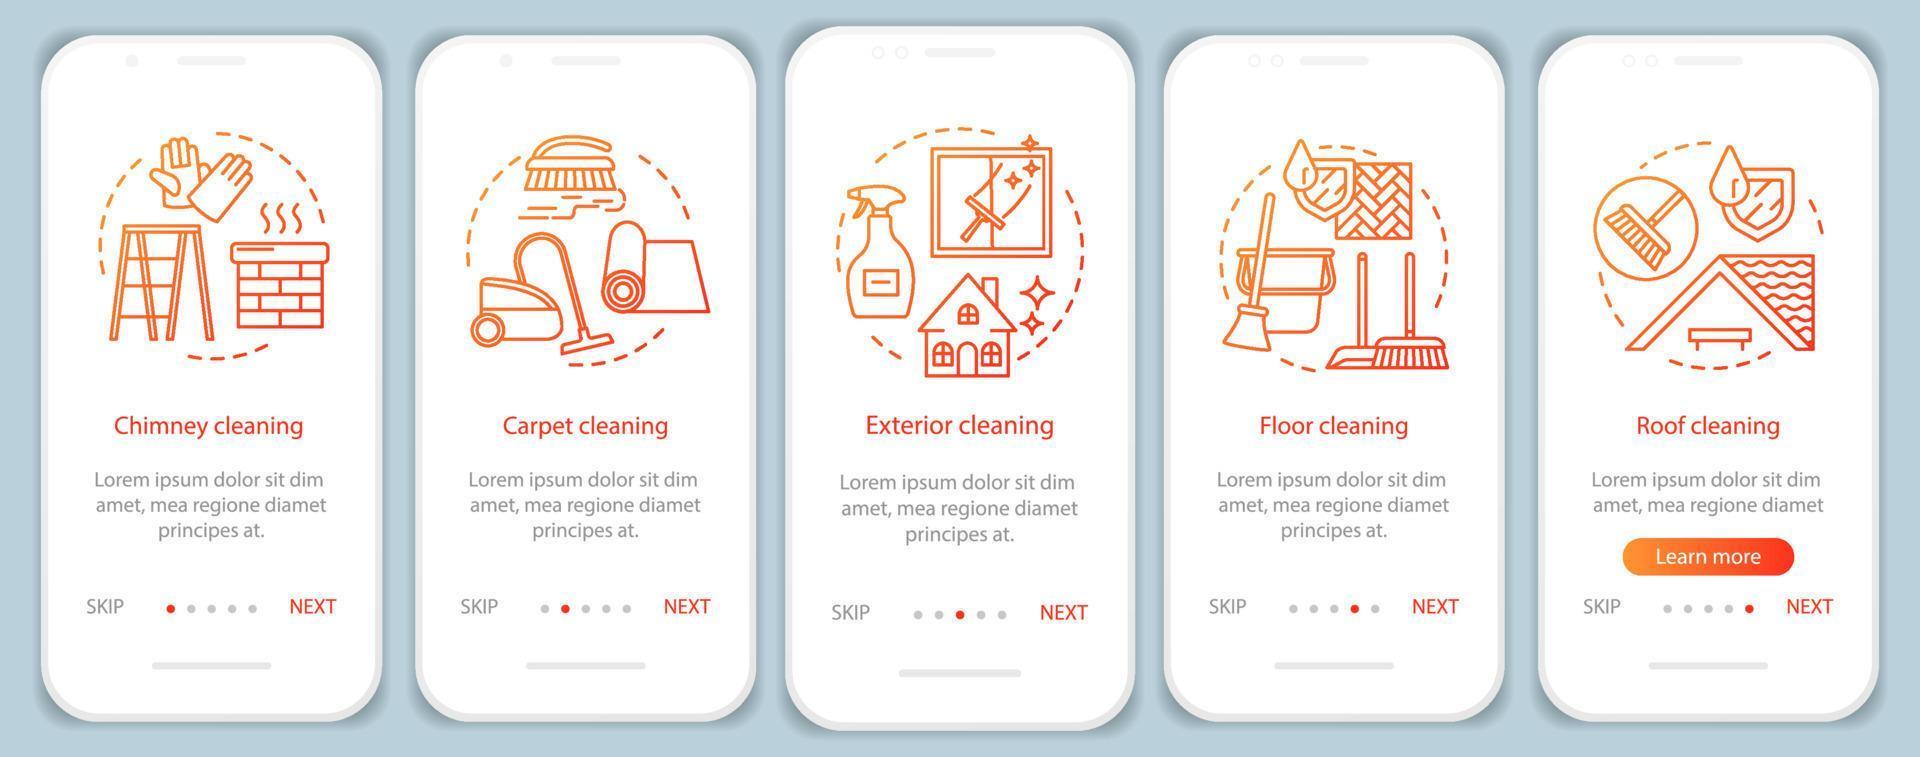 Additional cleaning services onboarding mobile app page screen, linear concepts. Chimney, exterior cleanup. Five, walkthrough steps graphic instructions. UX, UI, GUI vector template with illustrations